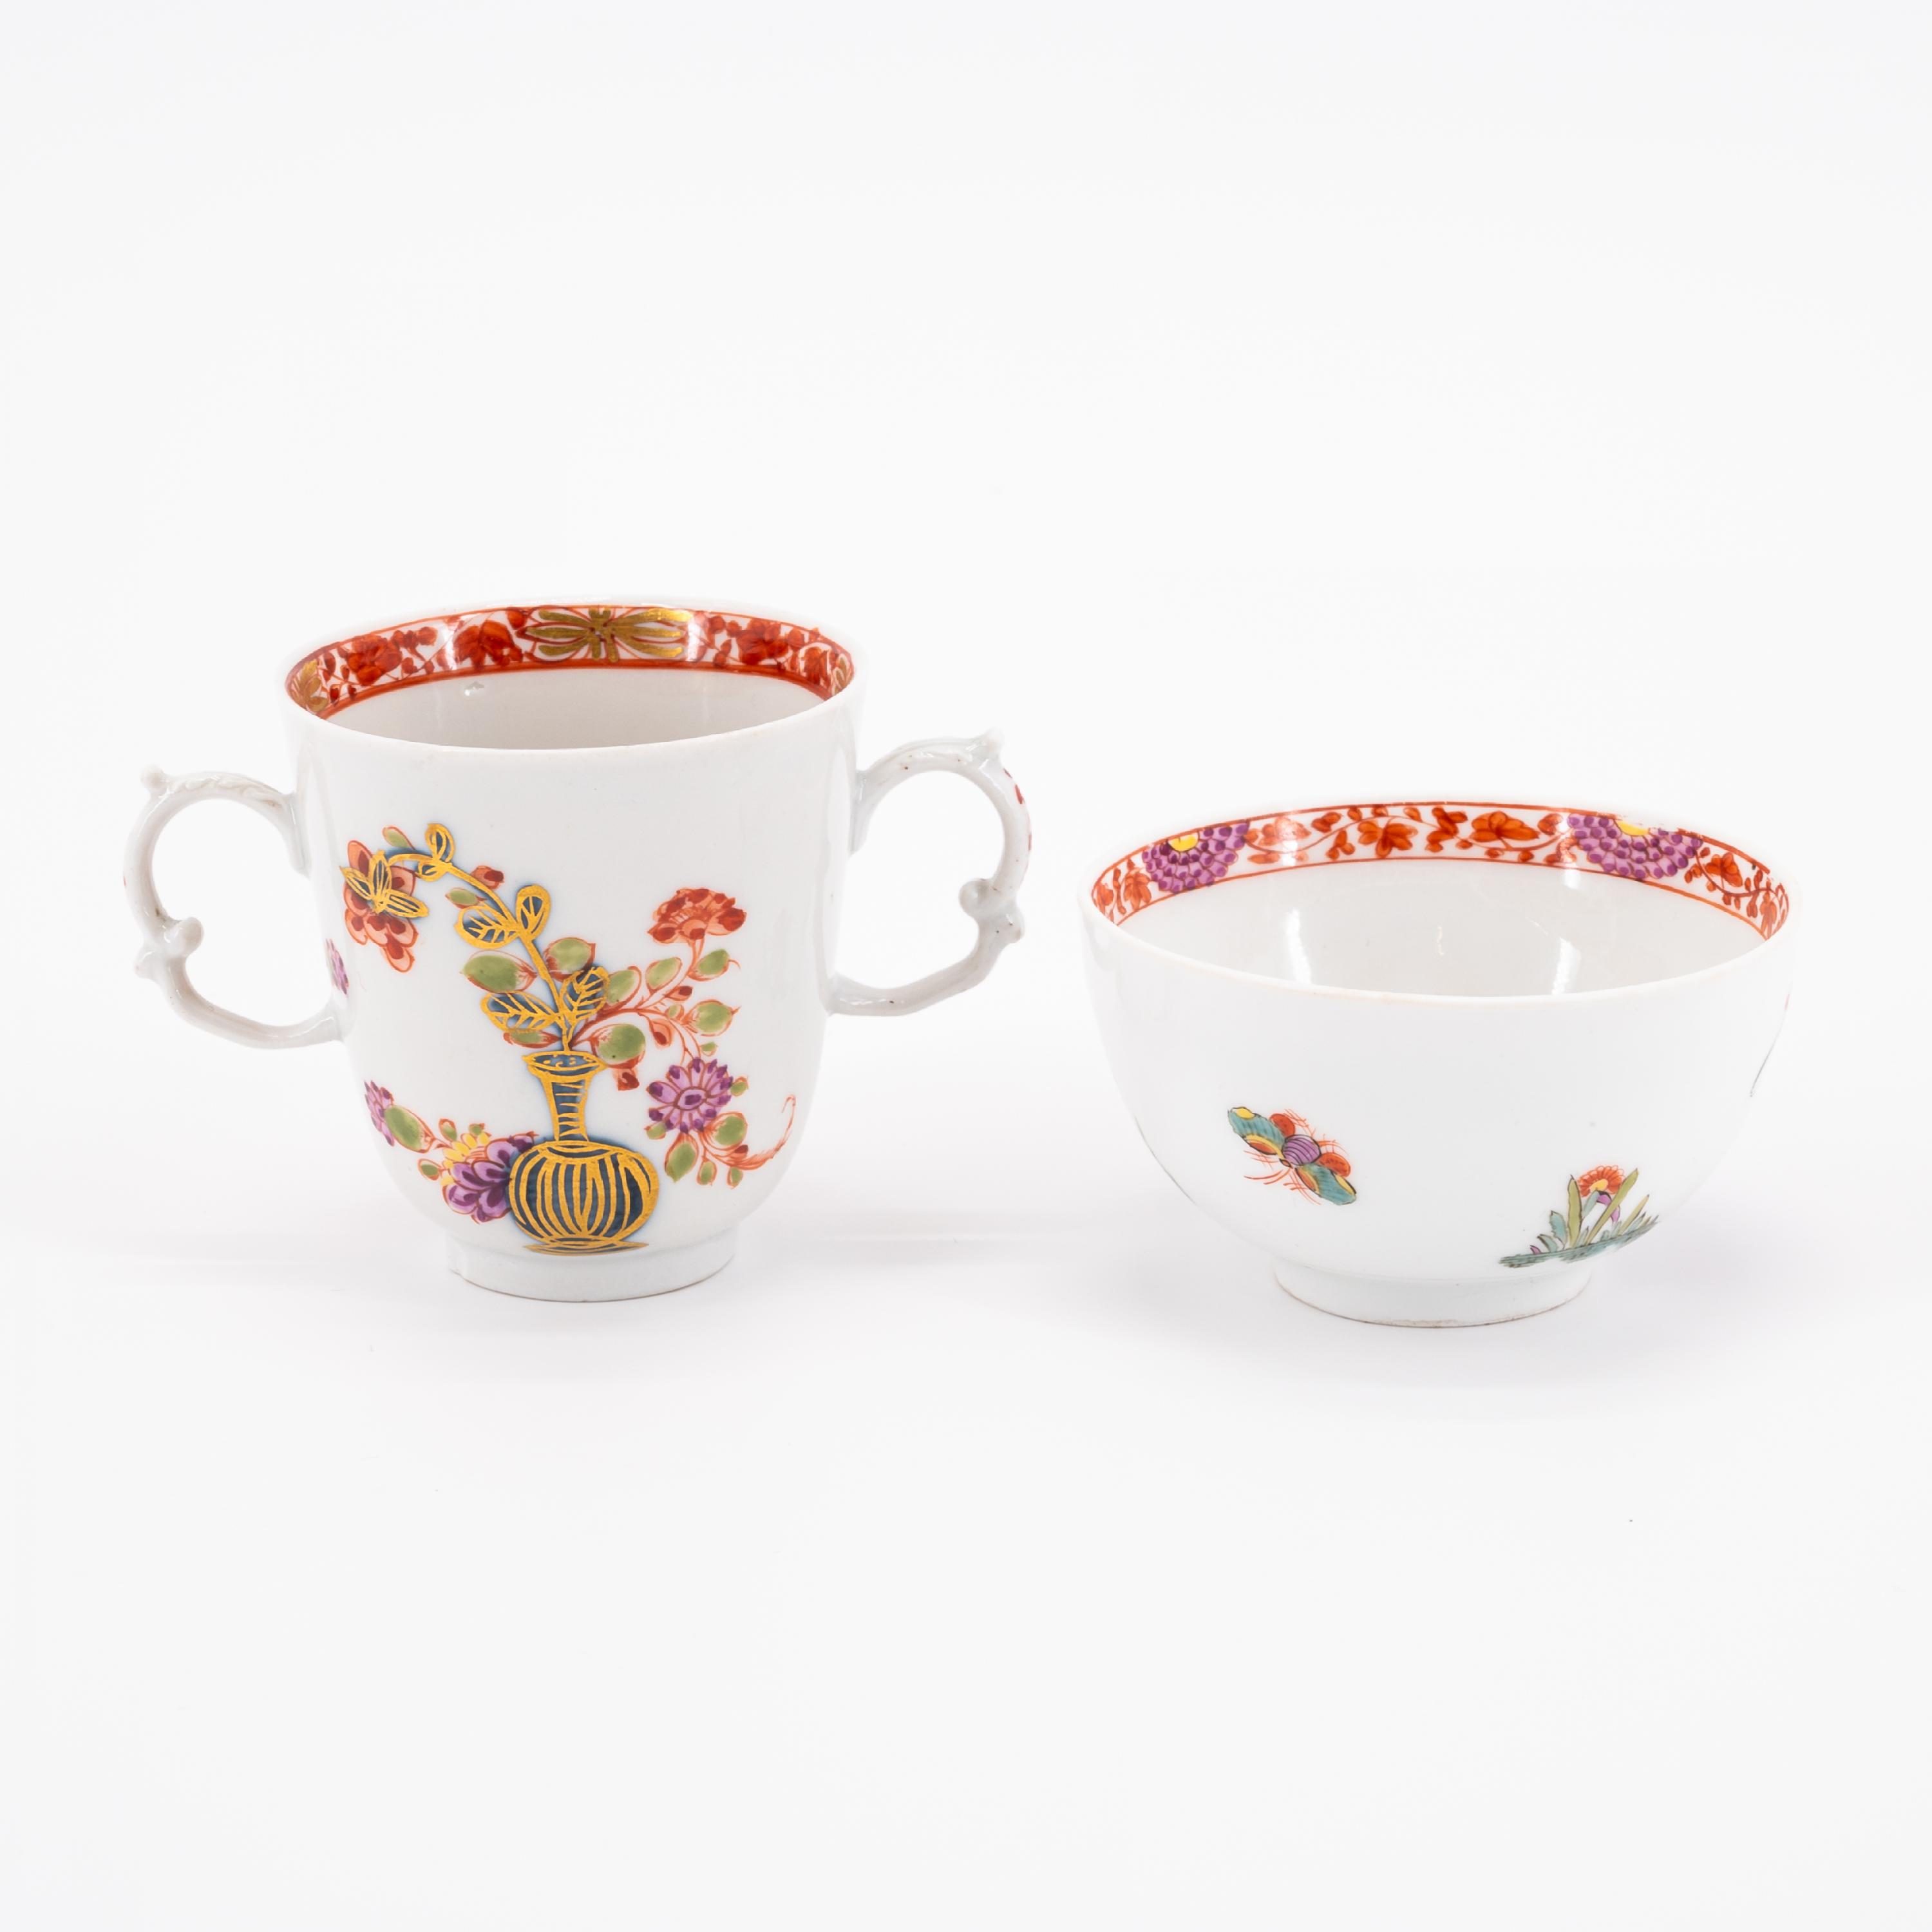 PORCELAIN TREMBLEUSE, TEA BOWL AND SAUCER WITH TABLE PATTERN AND KAKIEMON DECOR - Image 4 of 8